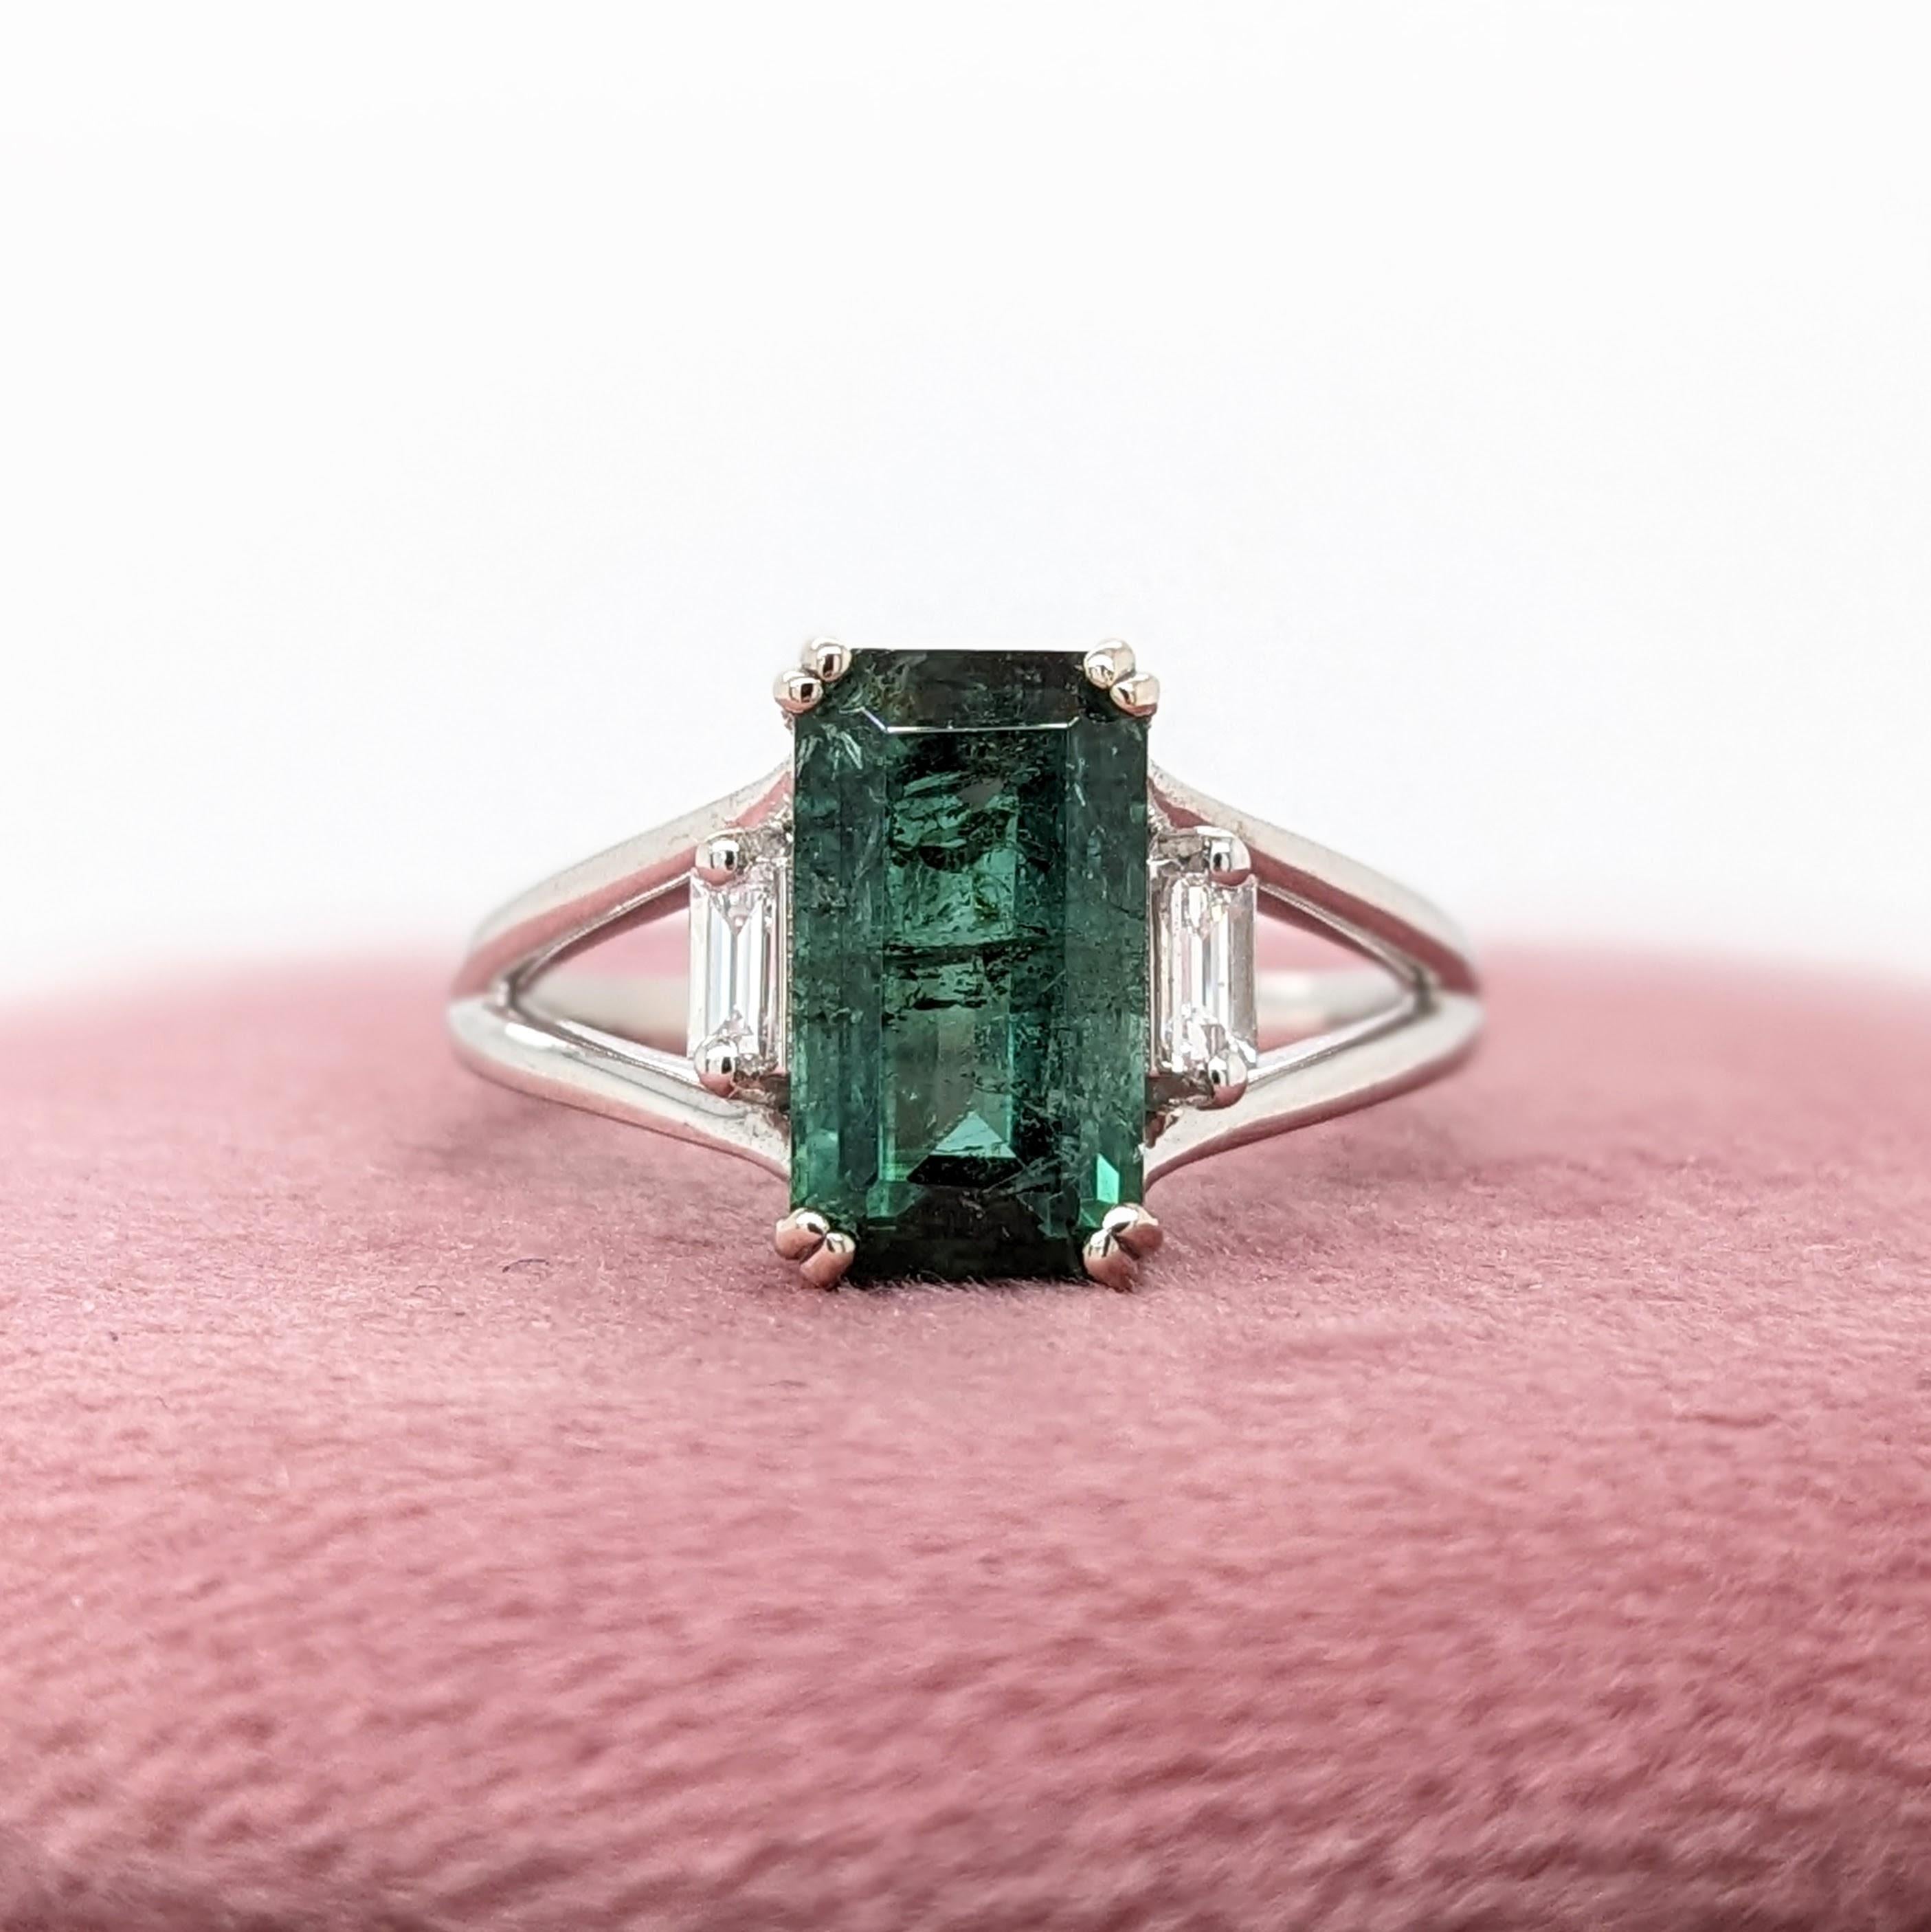 A vivid green tourmaline looks exquisite in this elegant minimalist ring with 2 cute diamond accents. A statement ring design perfect for an eye catching engagement or anniversary. This ring also makes a beautiful October birthstone ring for your